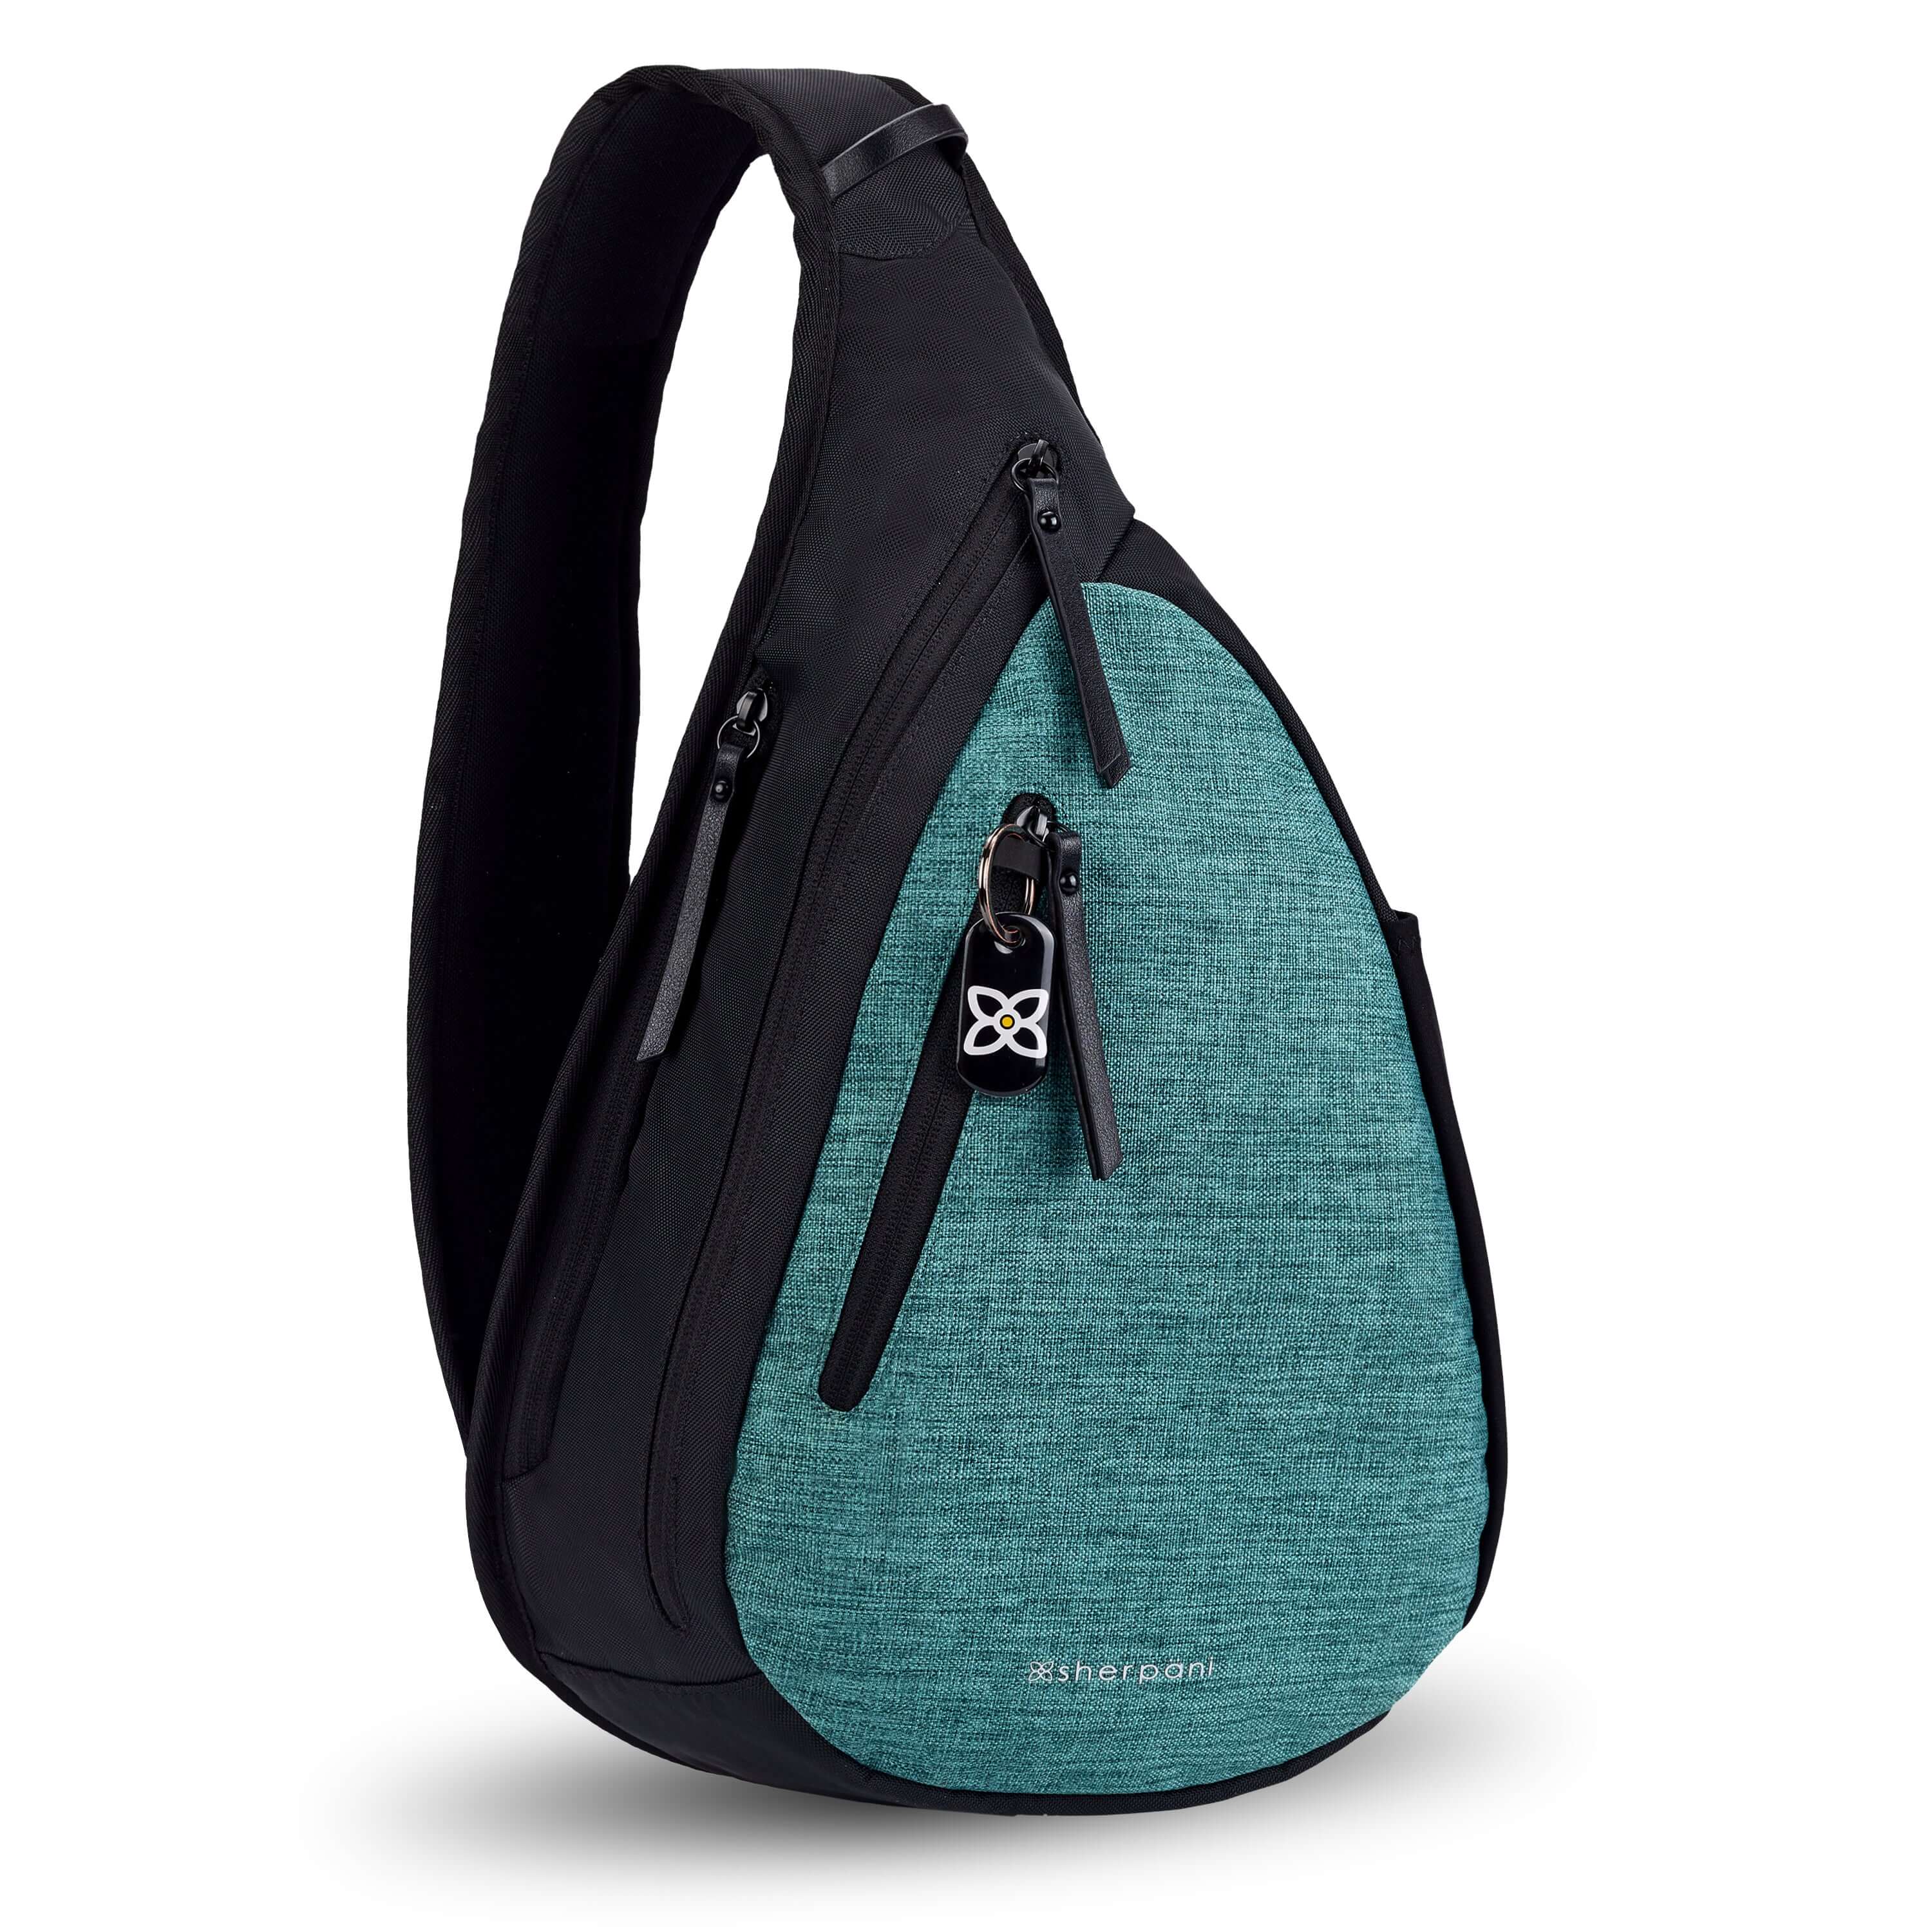 Angled front view of Sherpani&#39;s Anti-Theft bag, the Esprit AT in Teal, with vegan leather accents in black. There is a locking zipper compartment on the front, and two more zipper compartments on the side. An elastic water bottle holder sits on the other side of the bag.